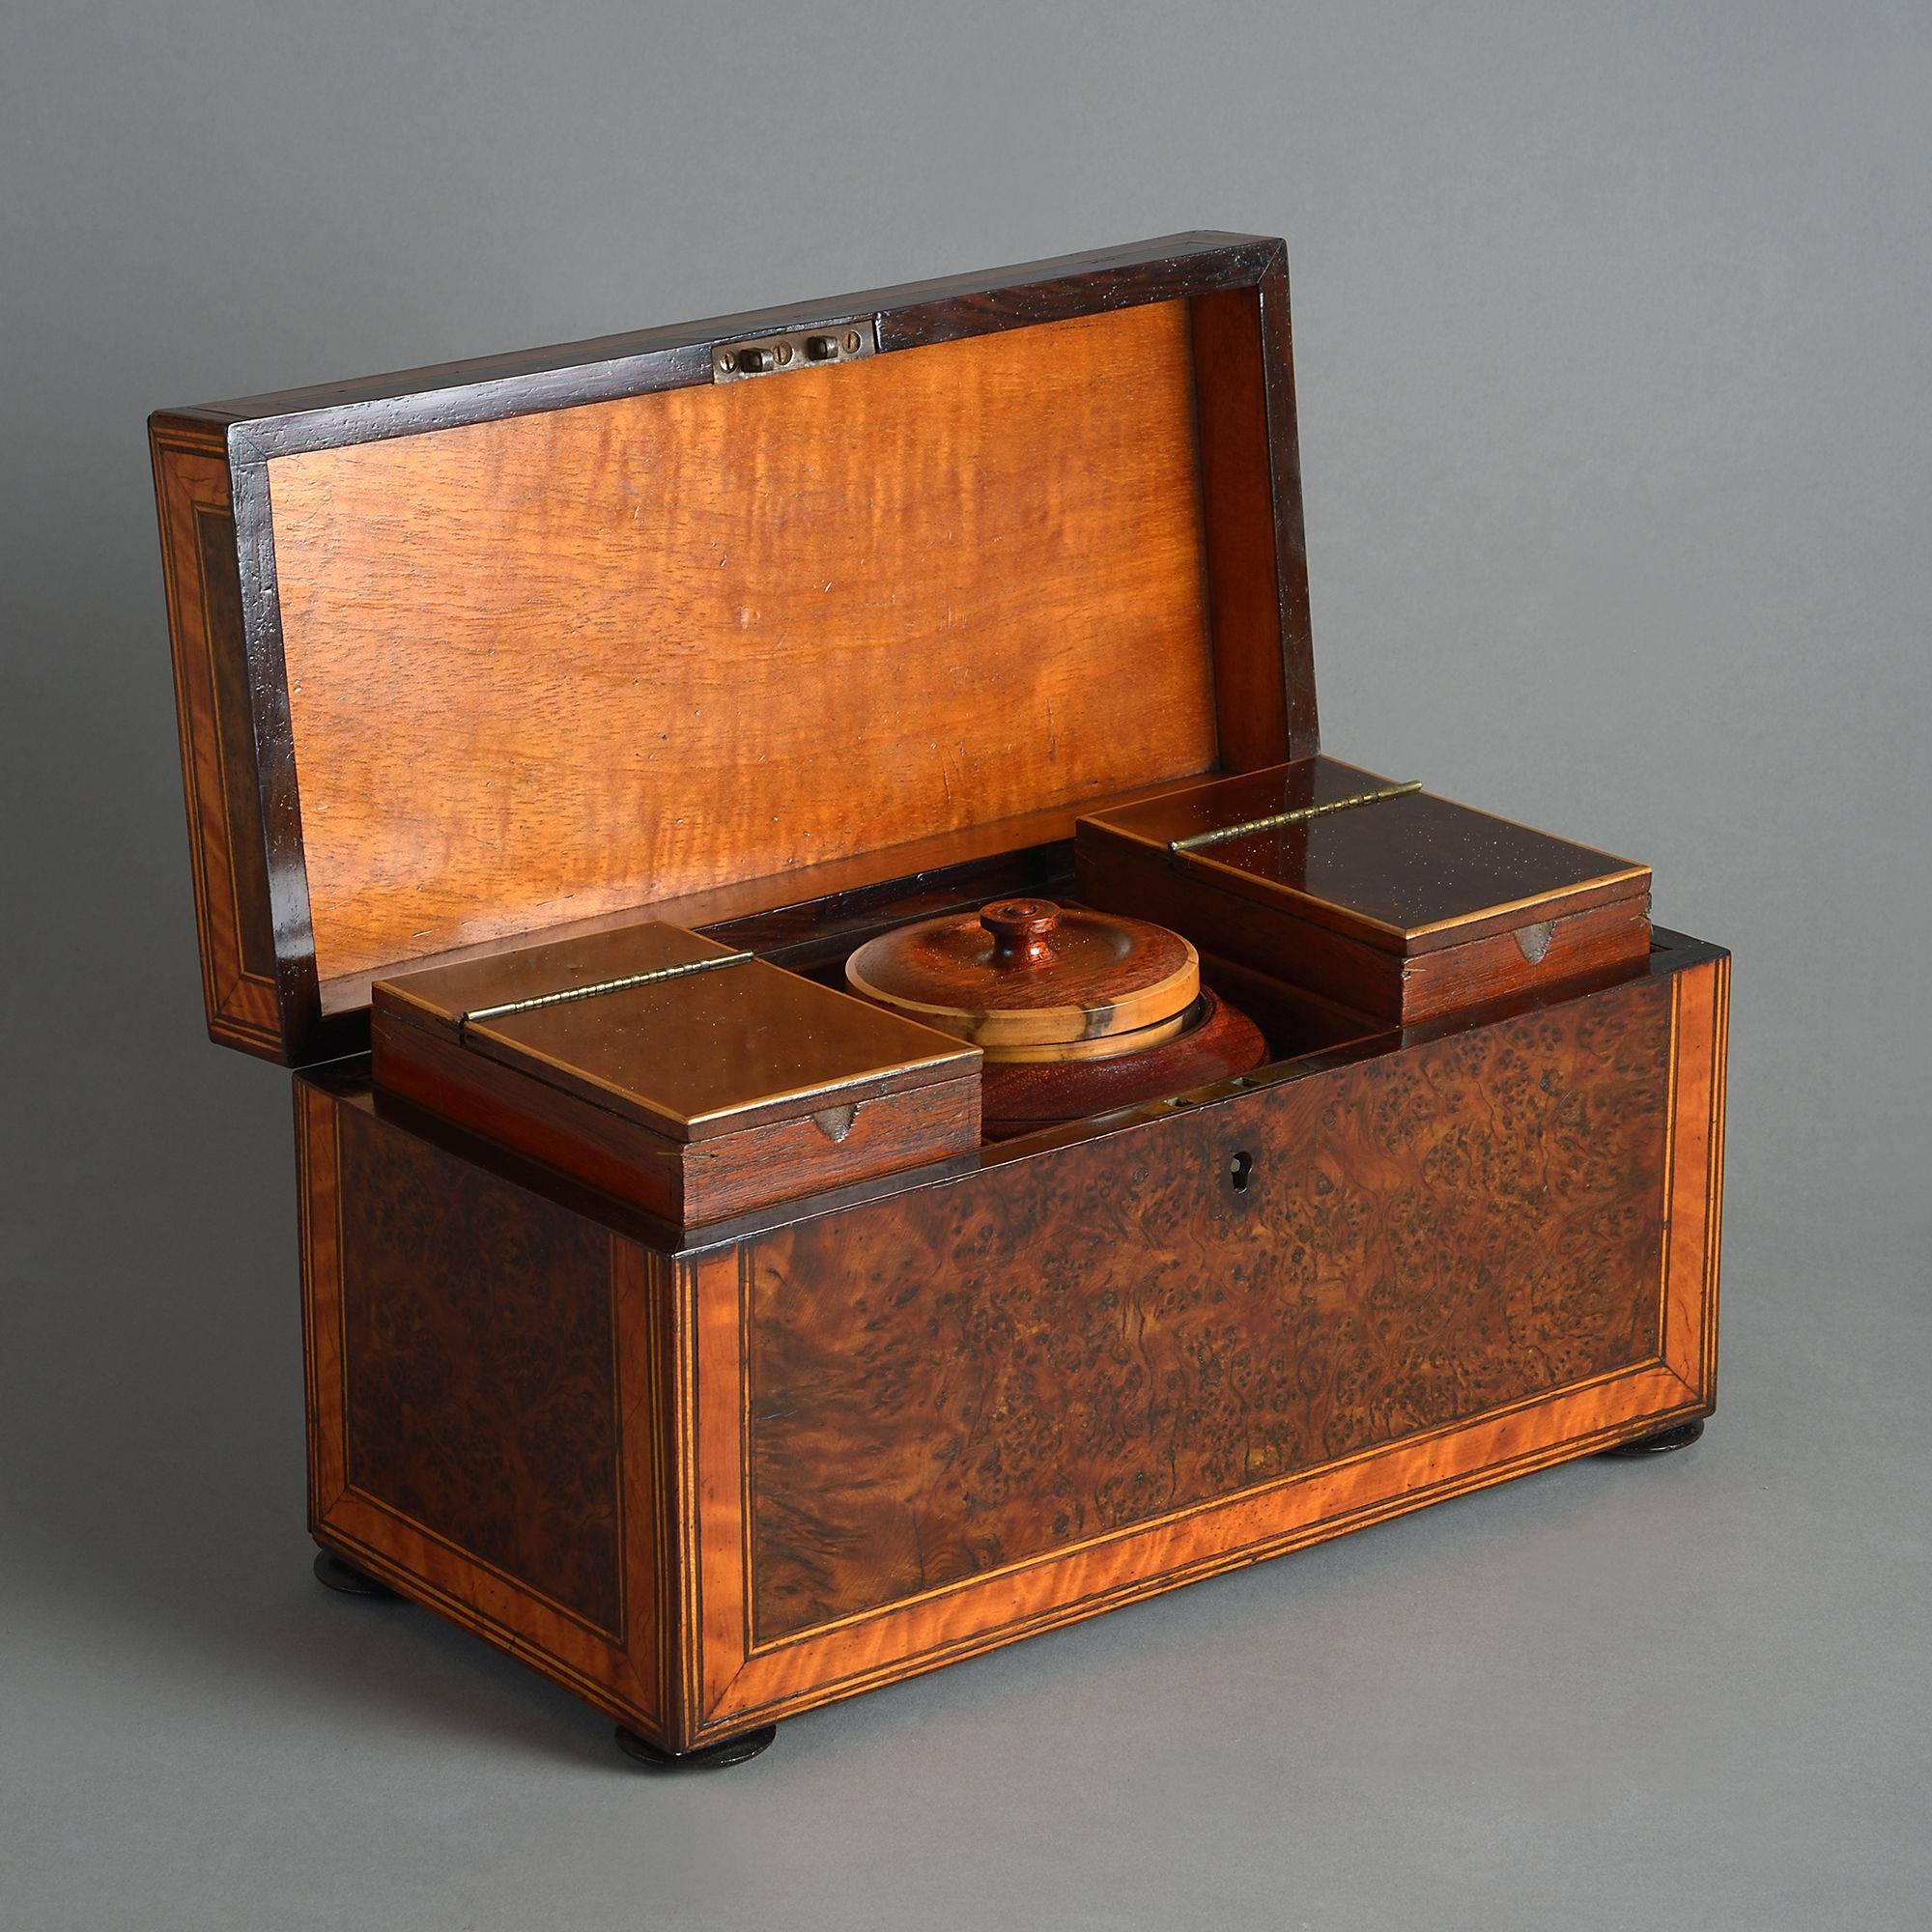 A George III Period burr elm and satinwood veneered tea caddy, retaining its original compartments and mixing bowl.